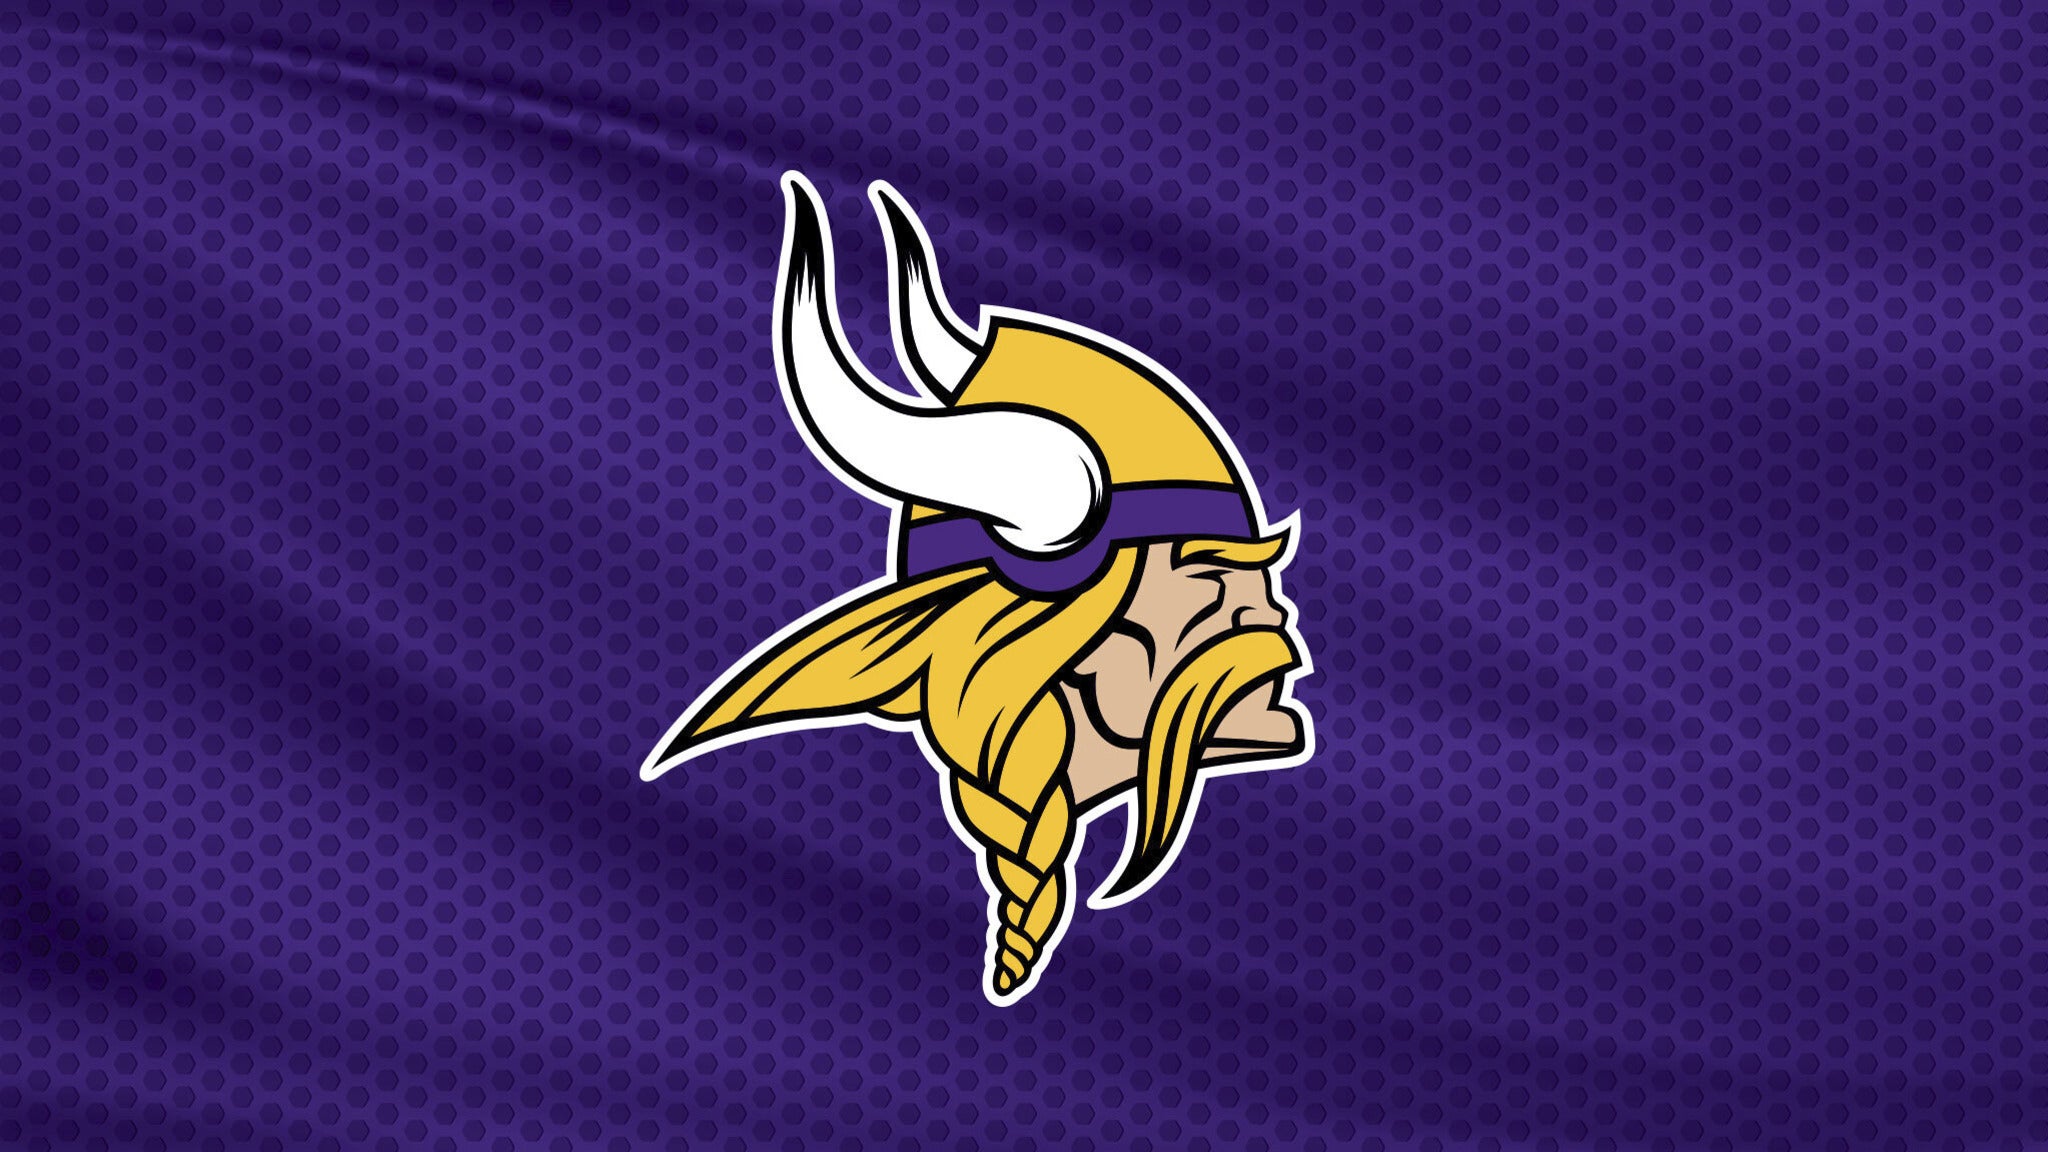 Rugby Seven Studios aligns with Minnesota Vikings